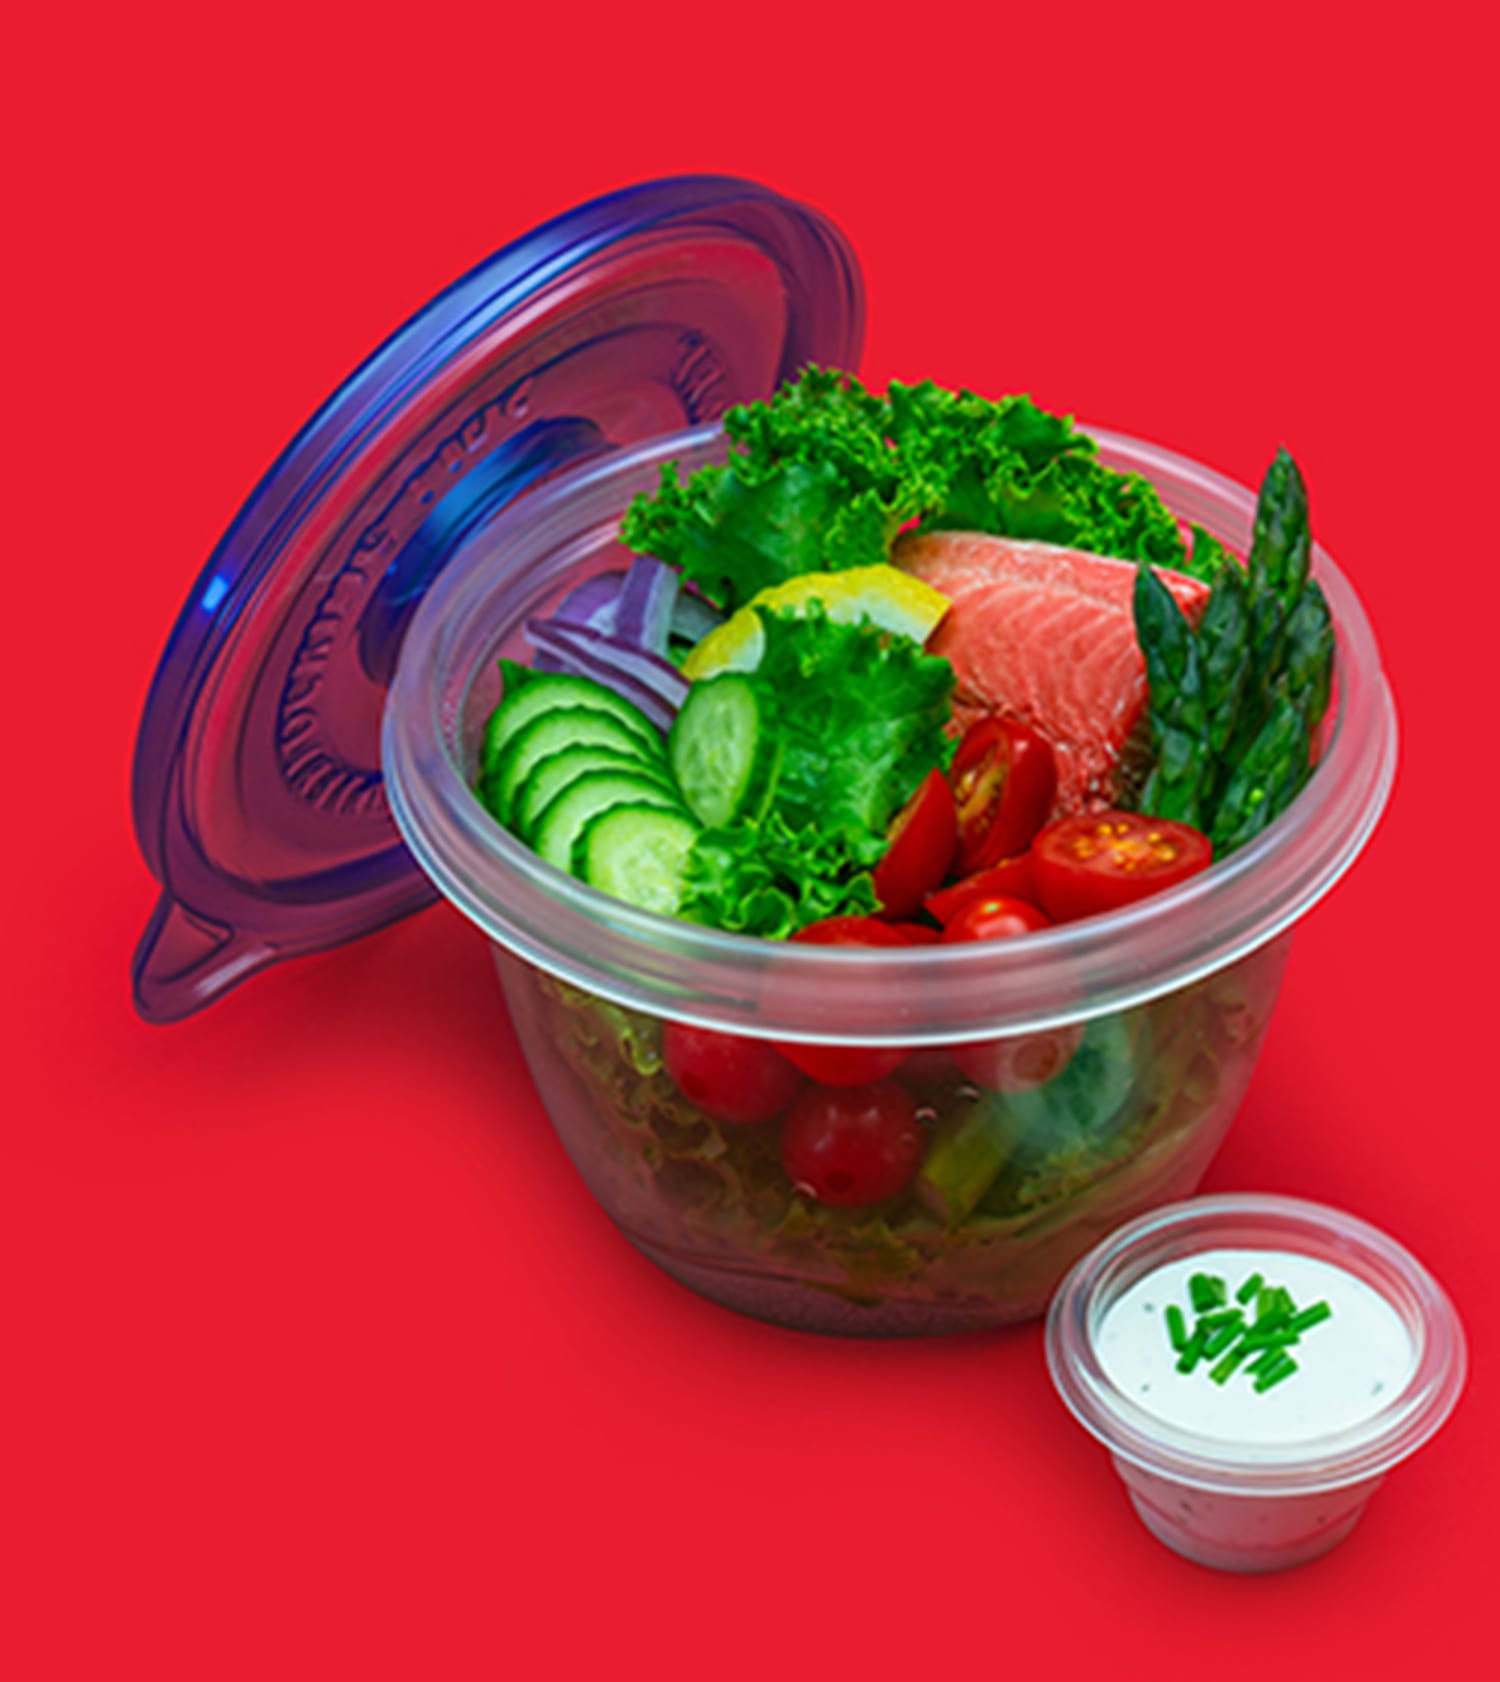 Here's the purpose of the circle on the Glad salad container lid